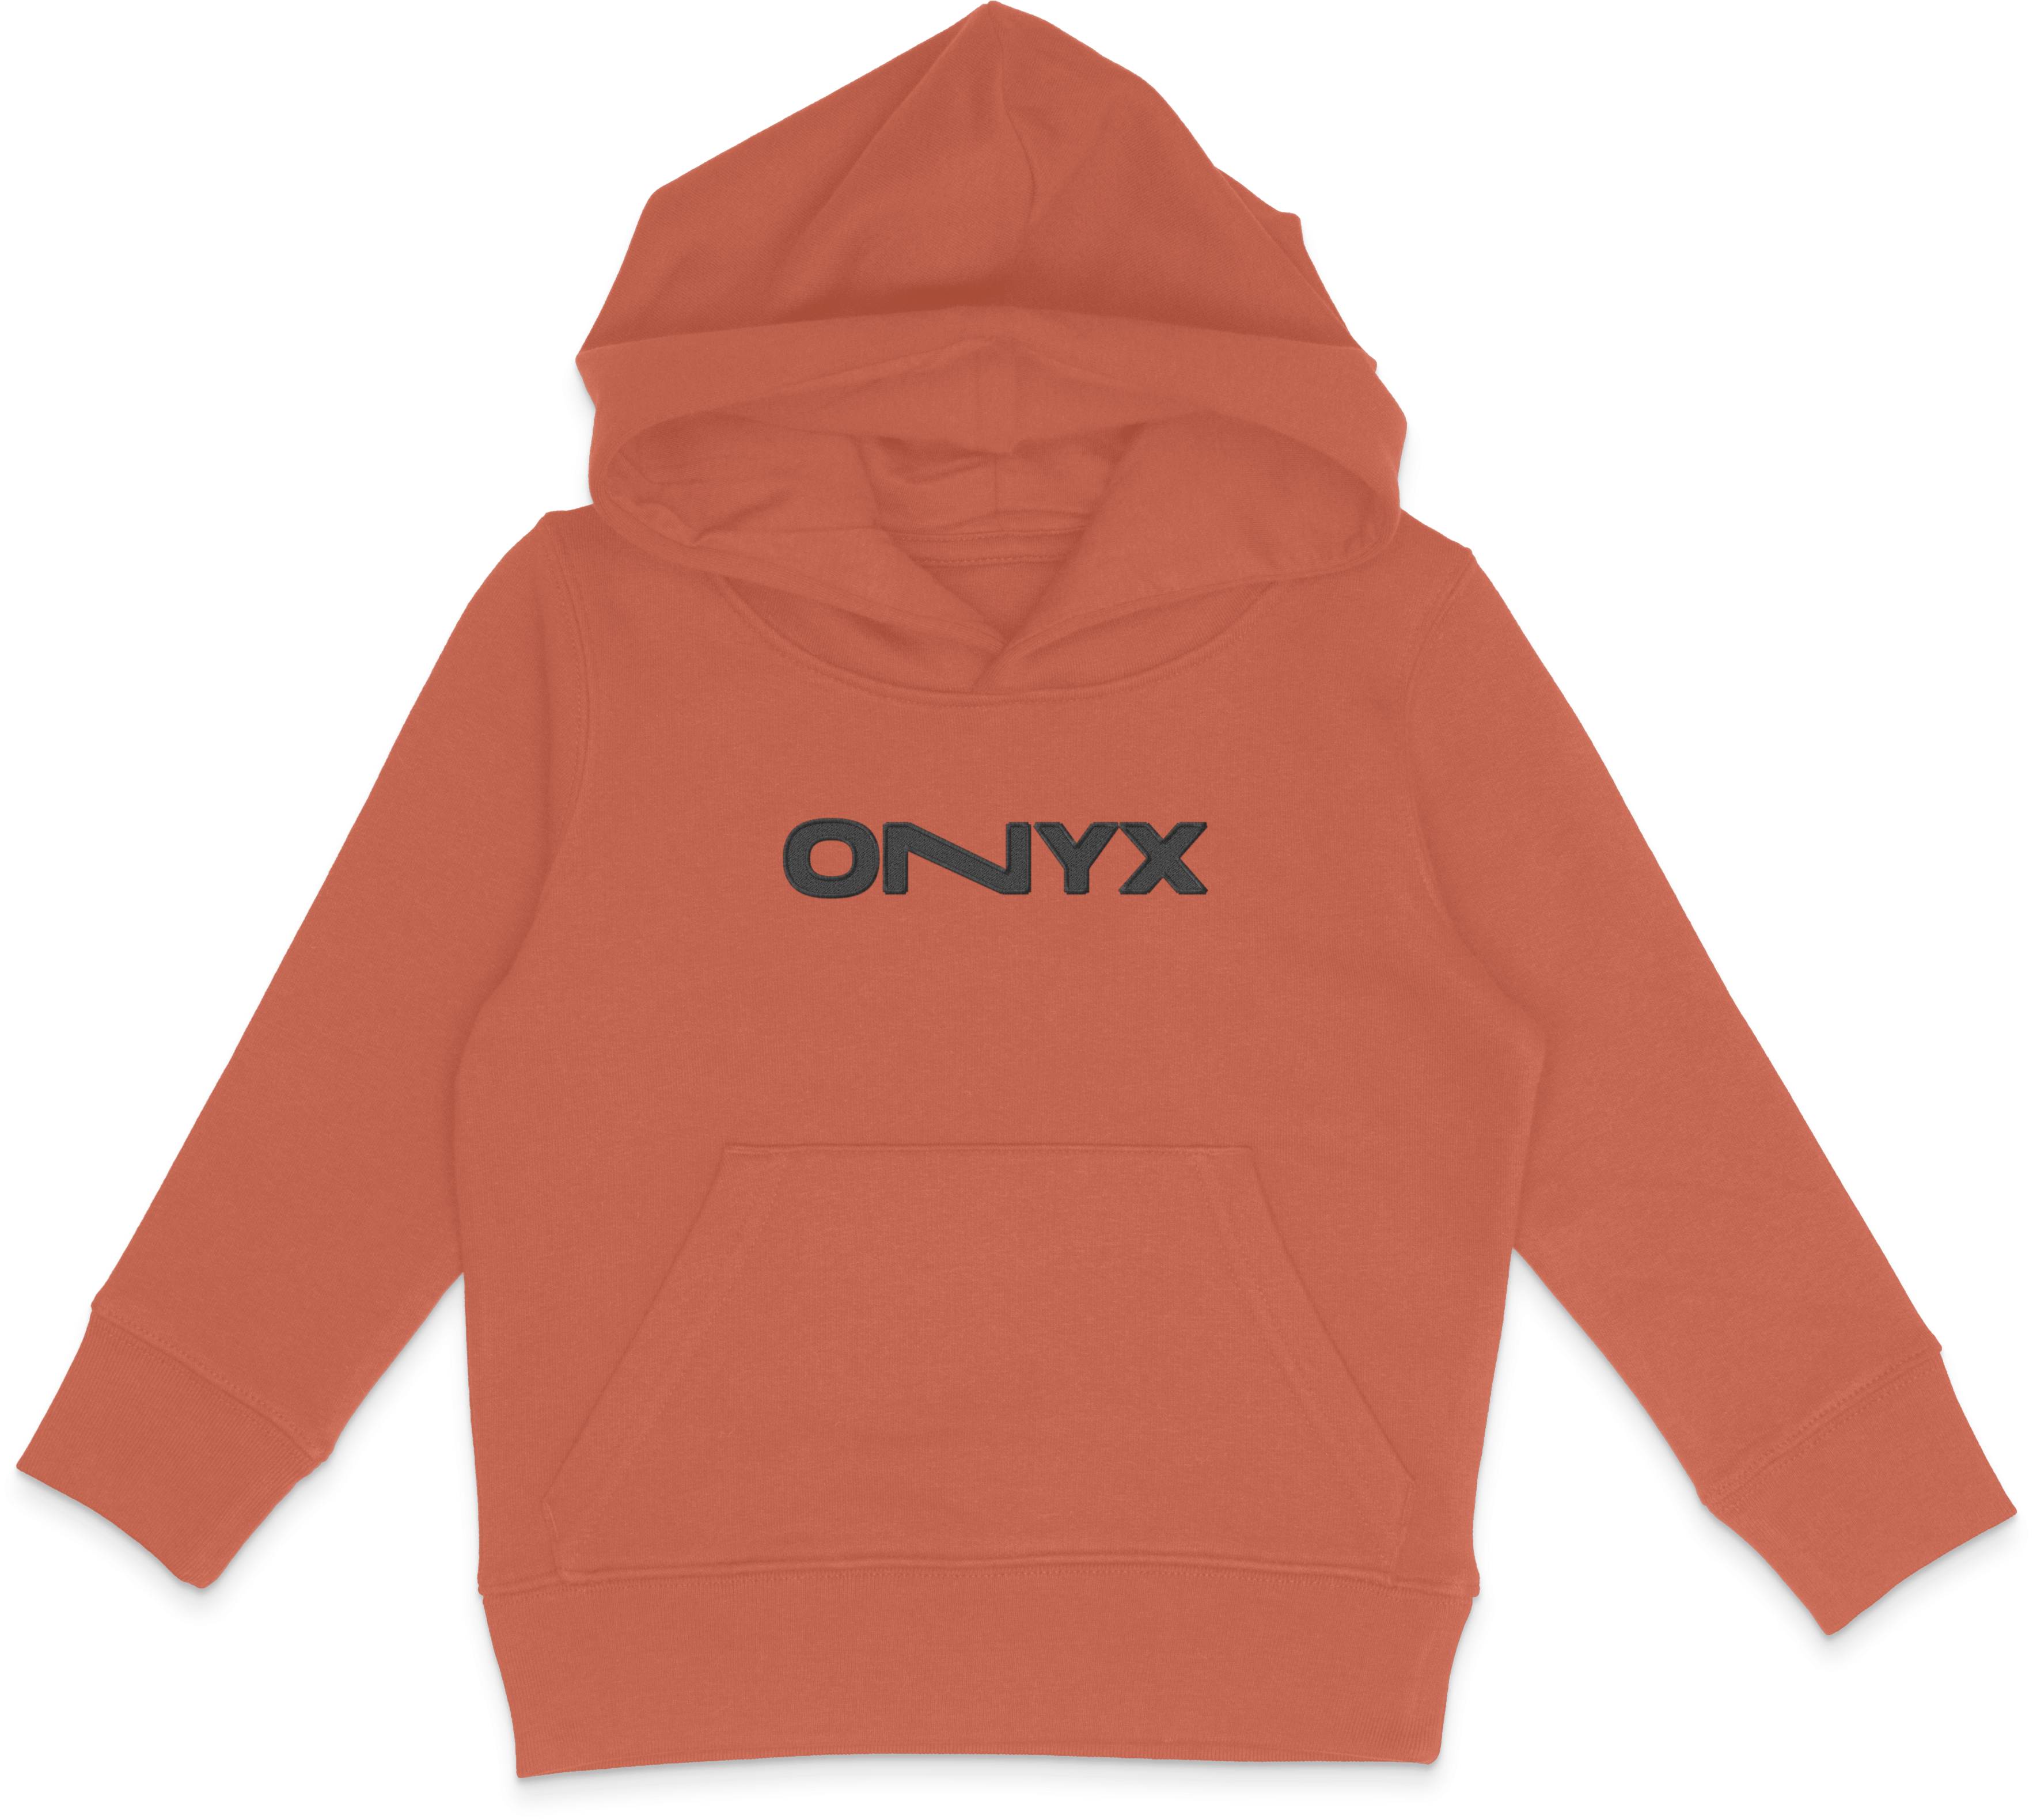 ONYX HOODIE - Simple yet luxury. We love solids! Now Available to